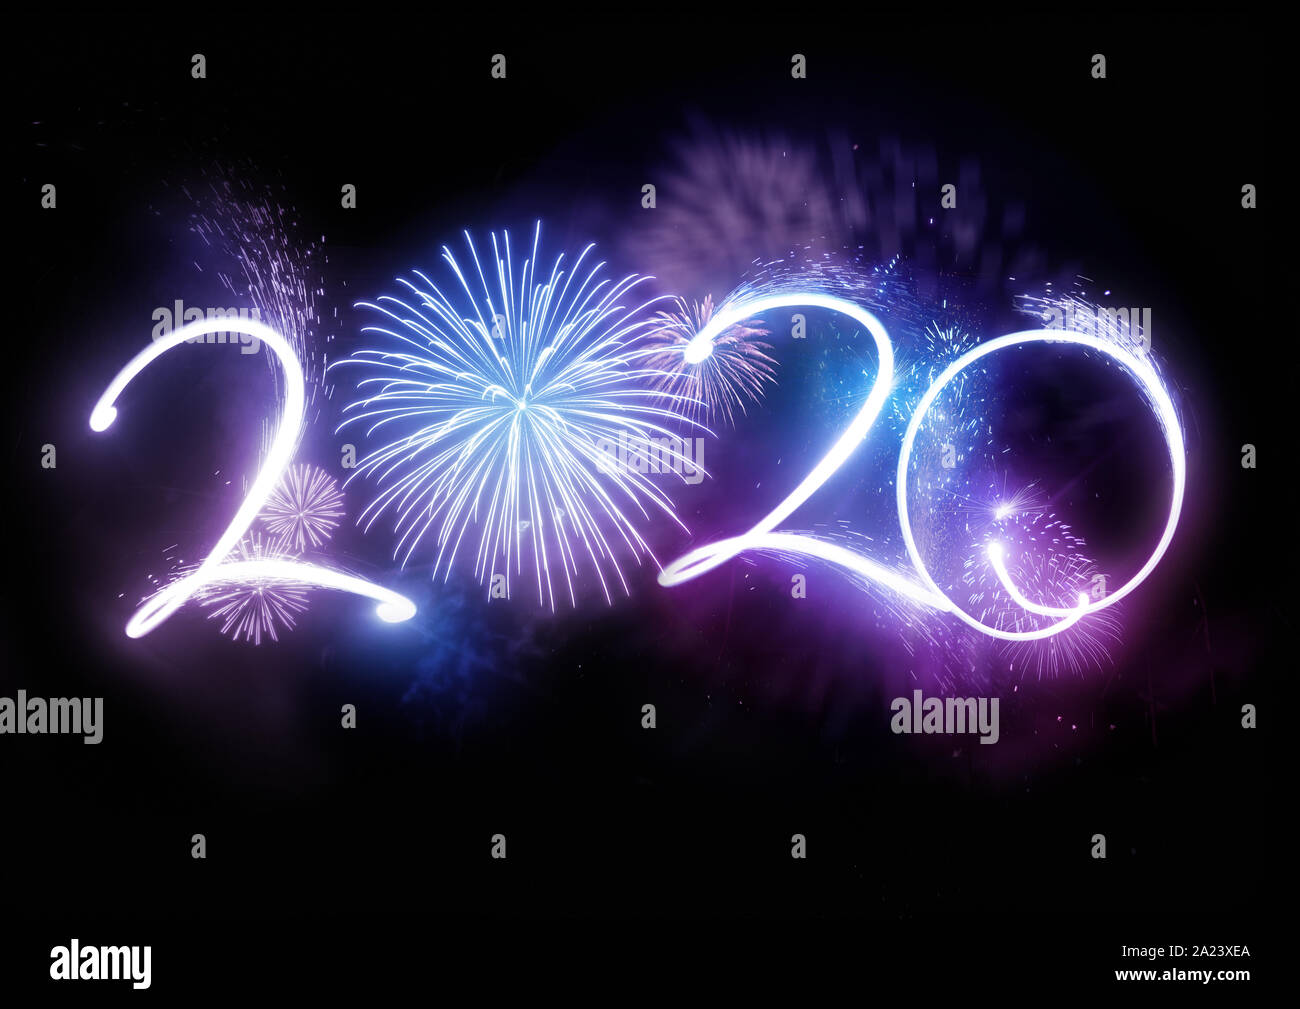 The year 2020 displayed with fireworks and strobes. New year celebration concept. Stock Photo